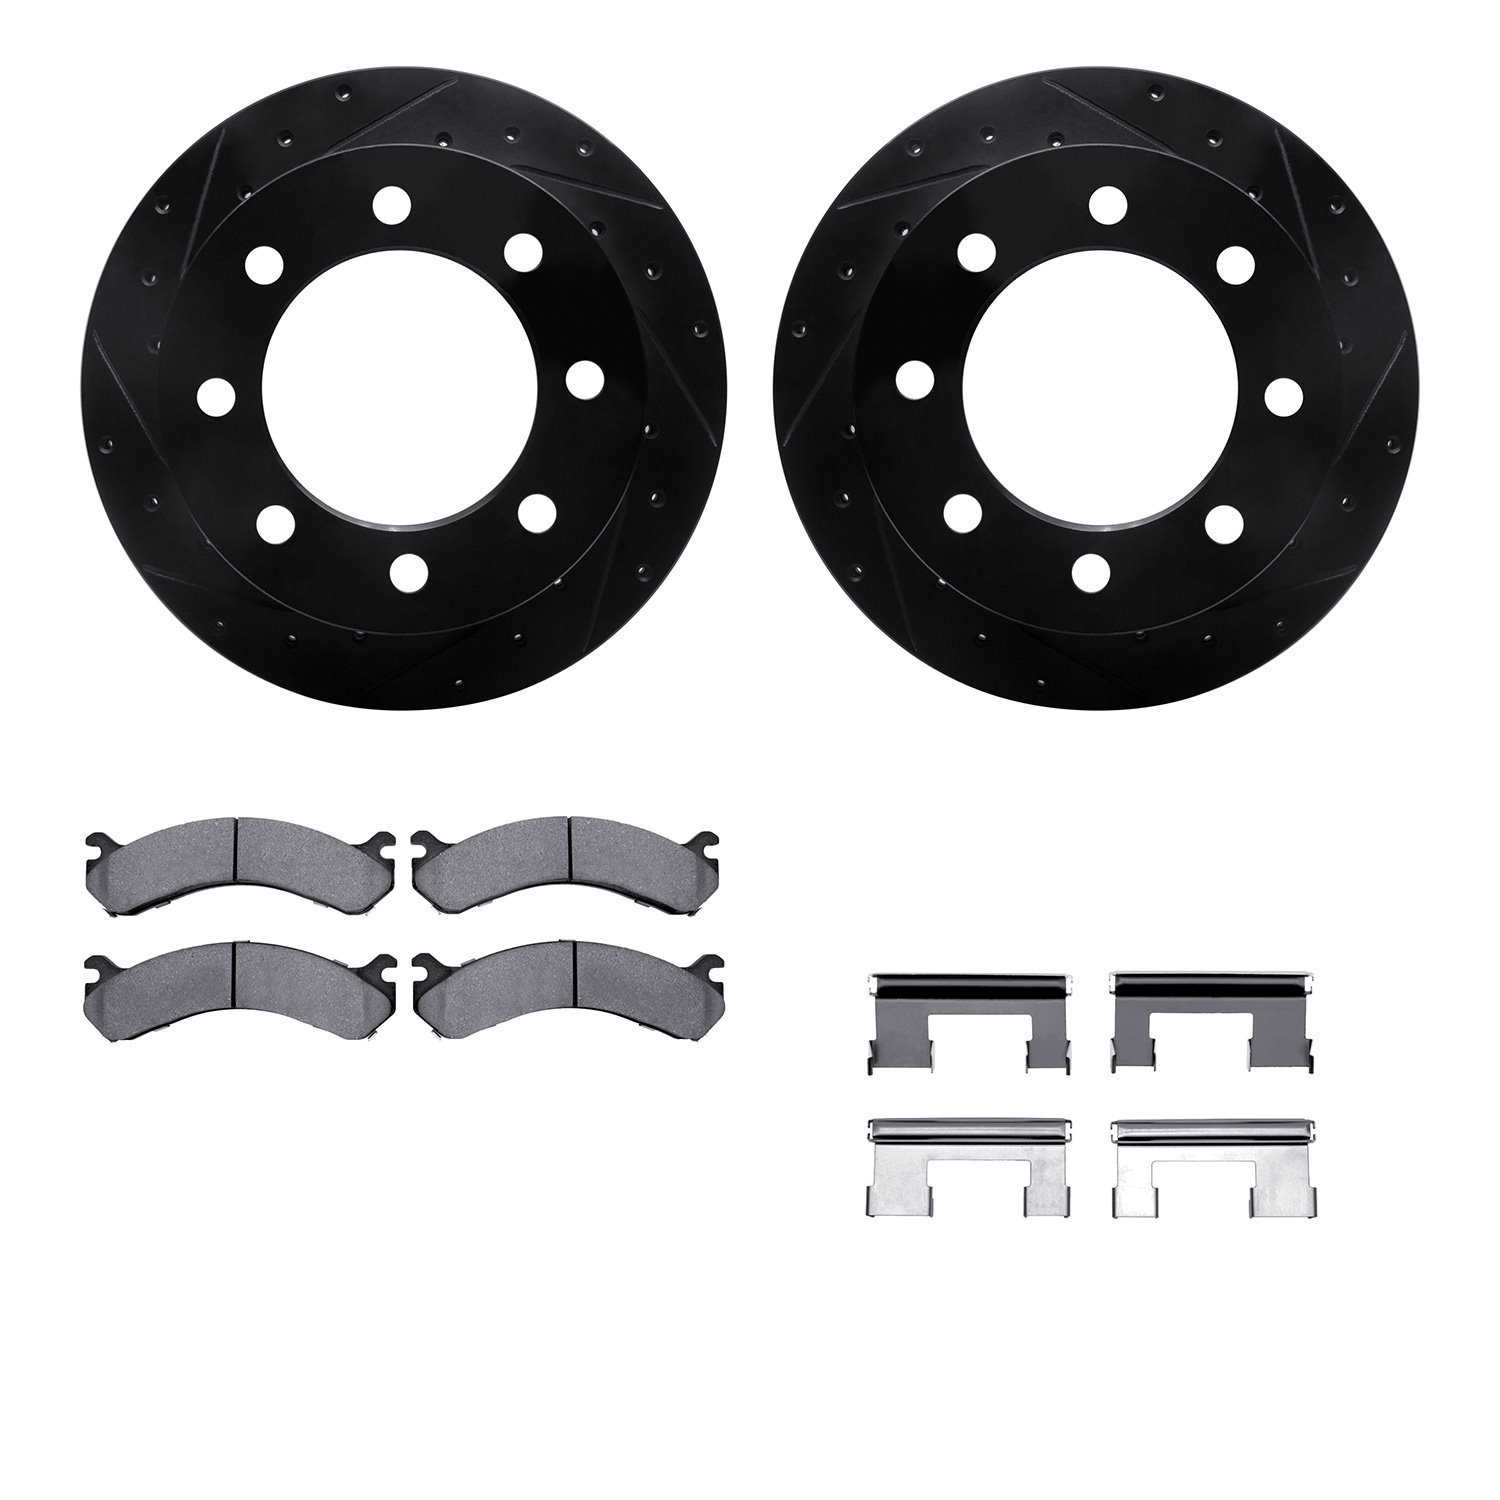 8412-48030 Drilled/Slotted Brake Rotors with Ultimate-Duty Brake Pads Kit & Hardware [Black], 2001-2010 GM, Position: Rear